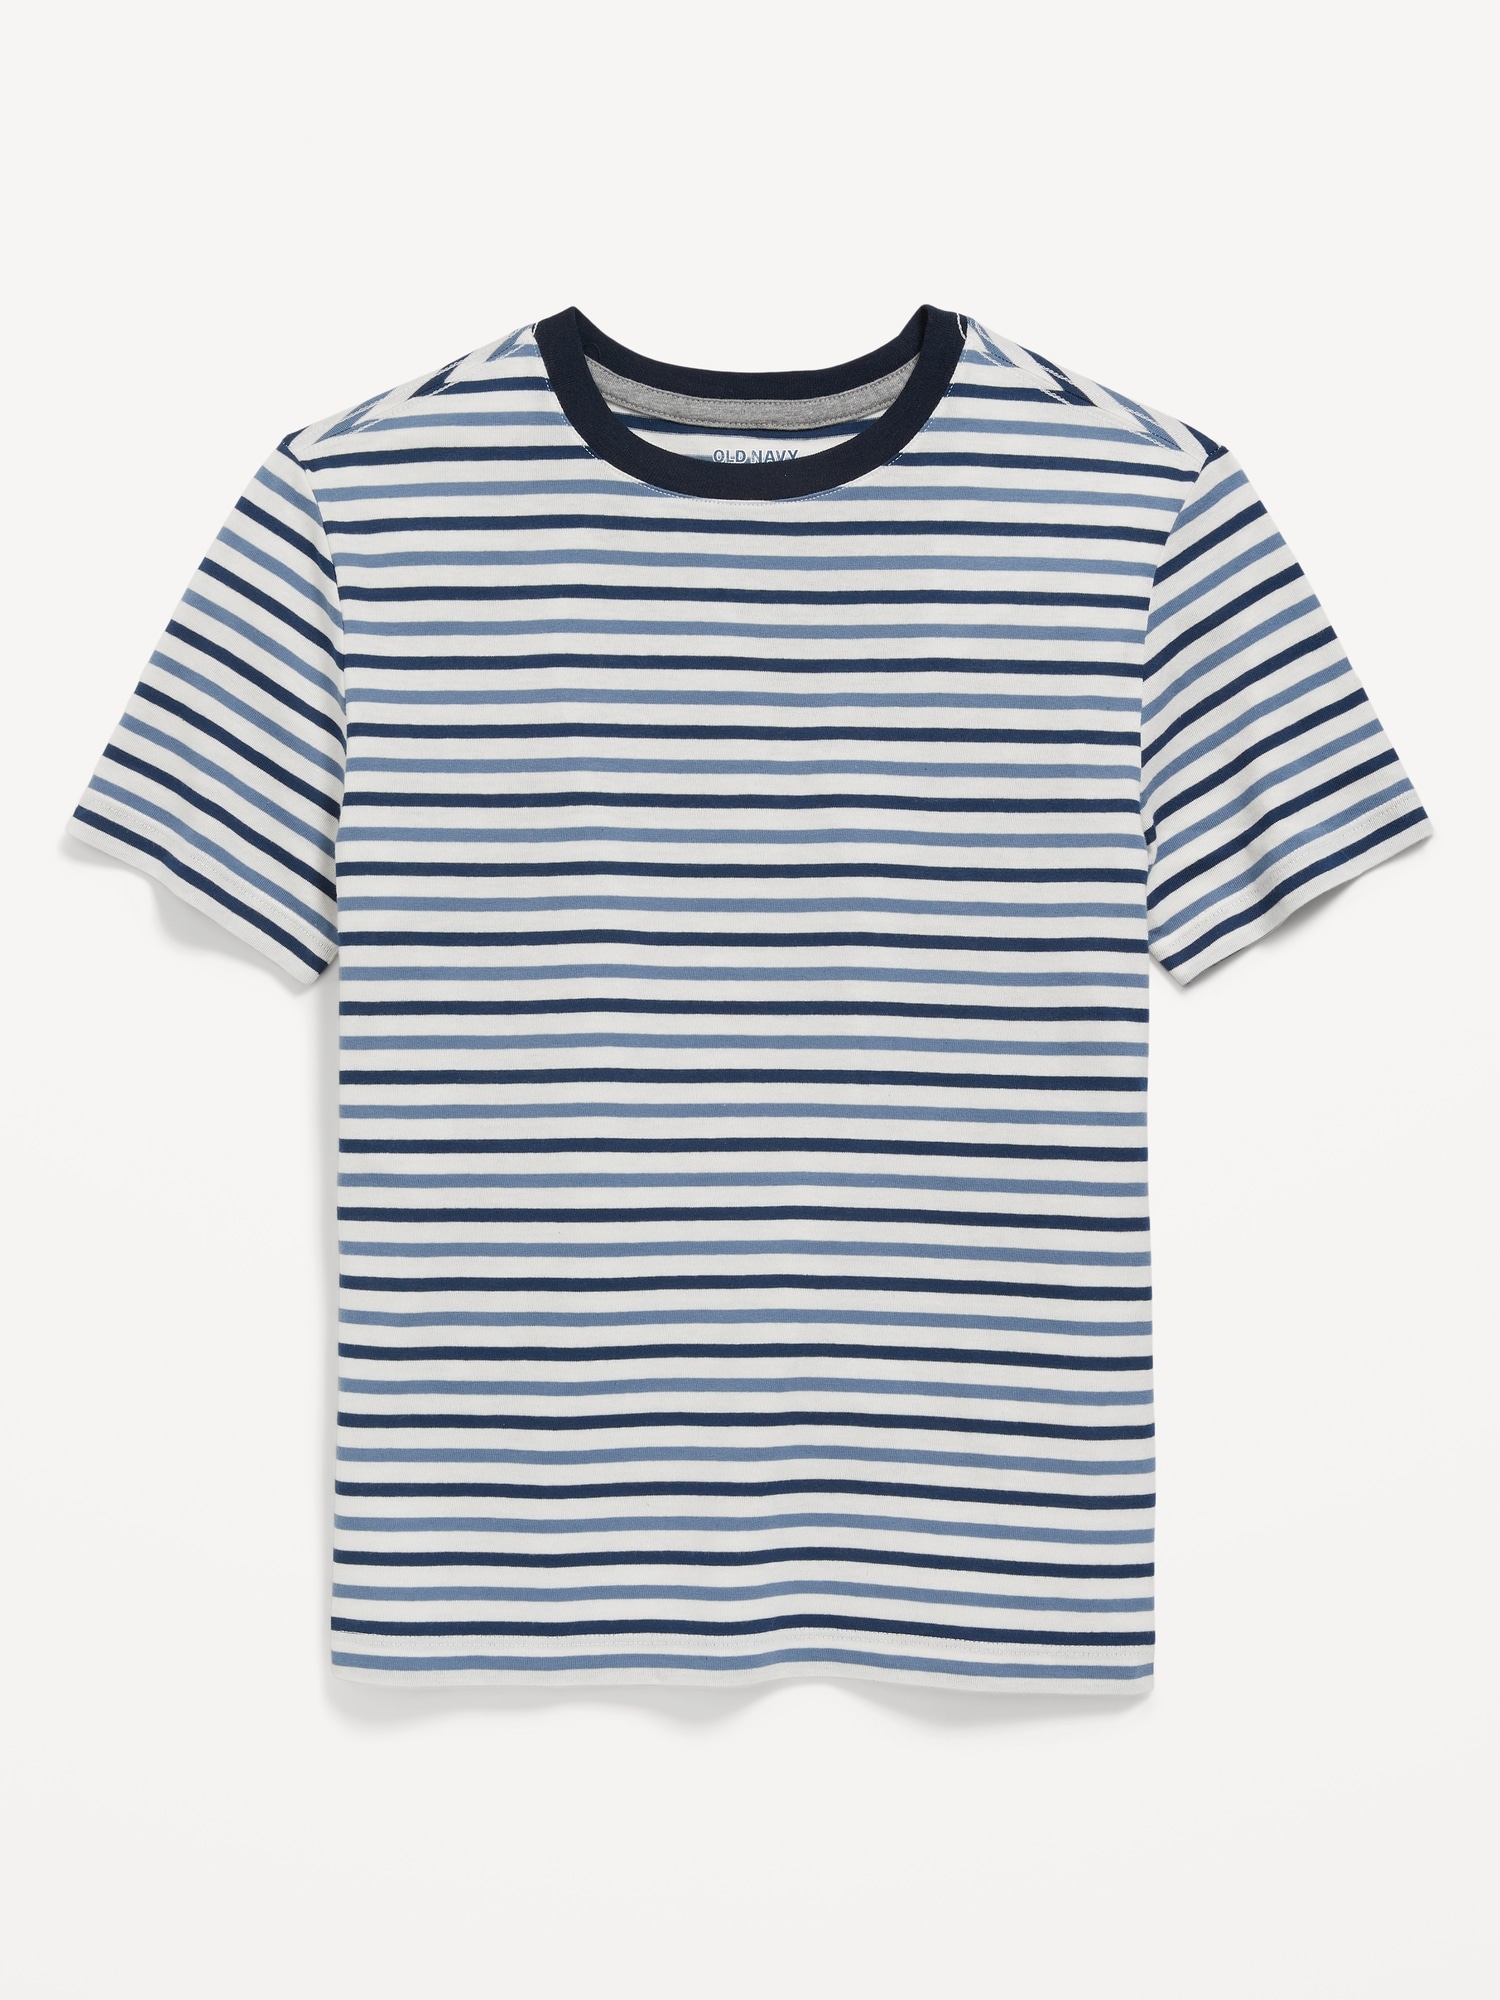 Softest Short-Sleeve Striped T-Shirt for Boys | Old Navy